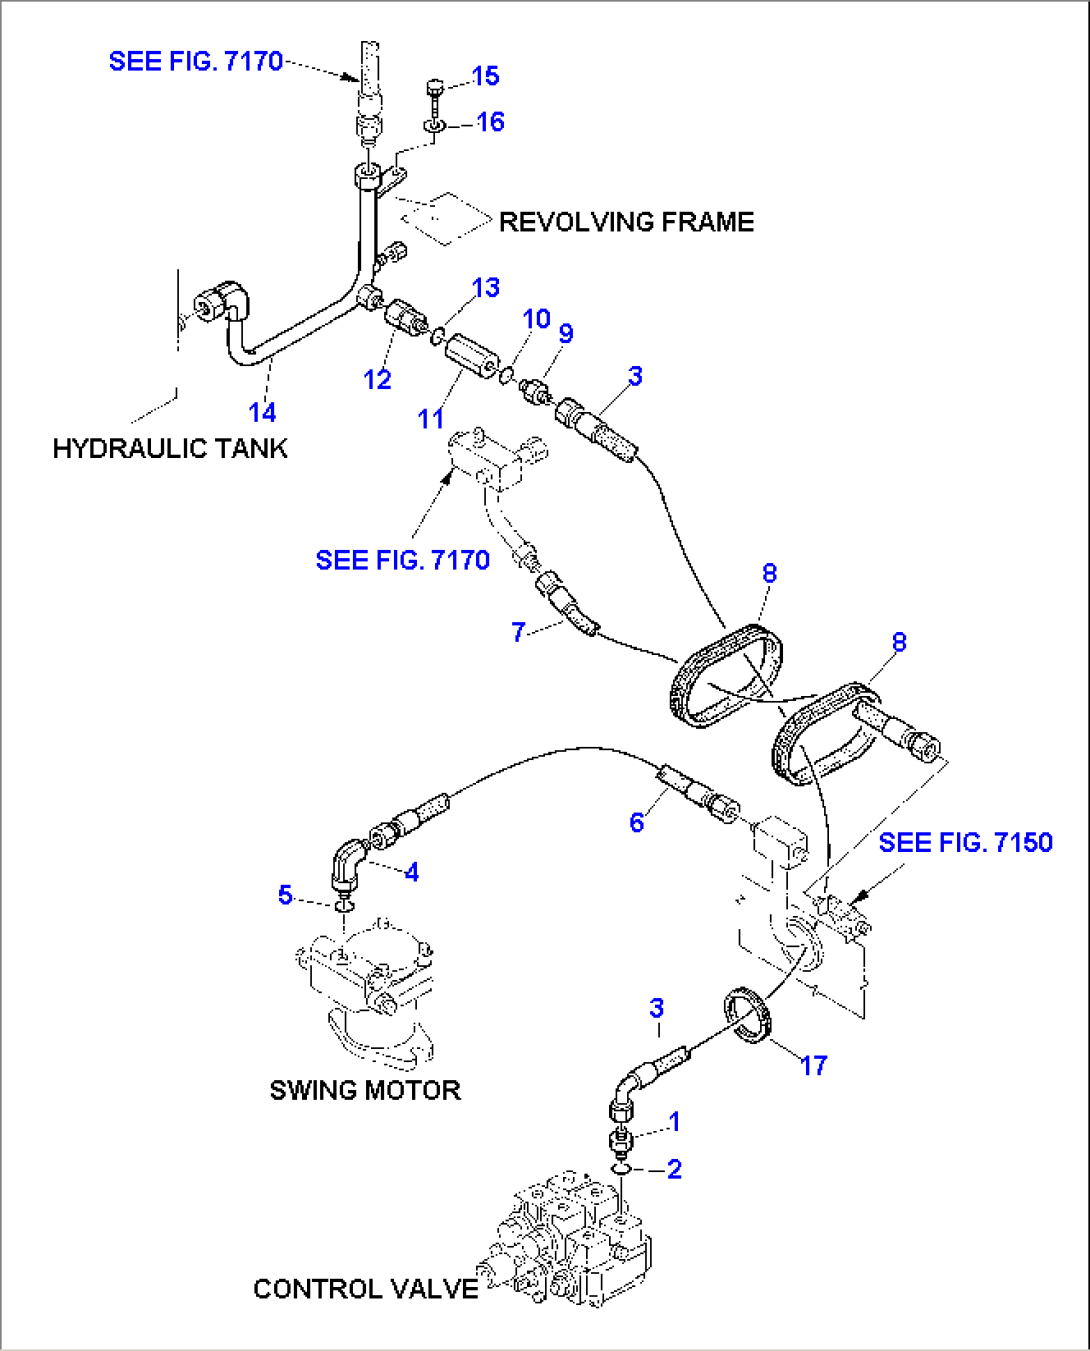 HYDRAULIC PIPING (RETURN LINE) (2nd PART)